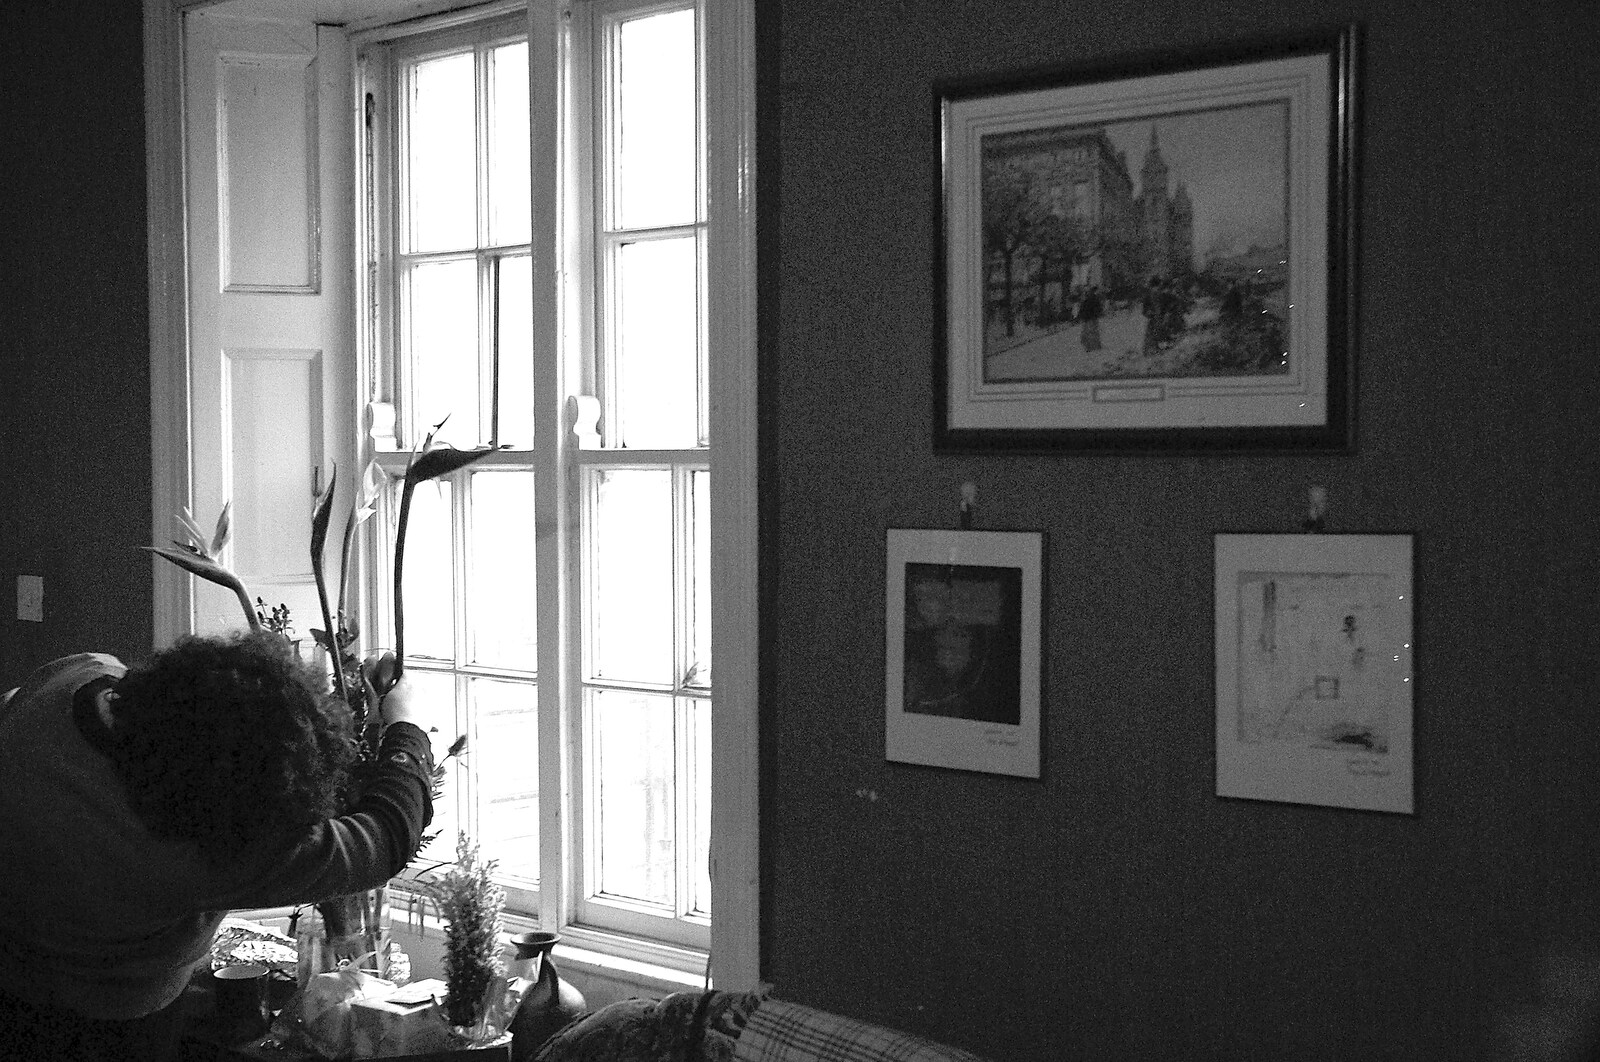 Louise arranges flowers by the window from The BBs at the Park Hotel, and Christmas in Blackrock, Dublin, Ireland - 25th December 2006